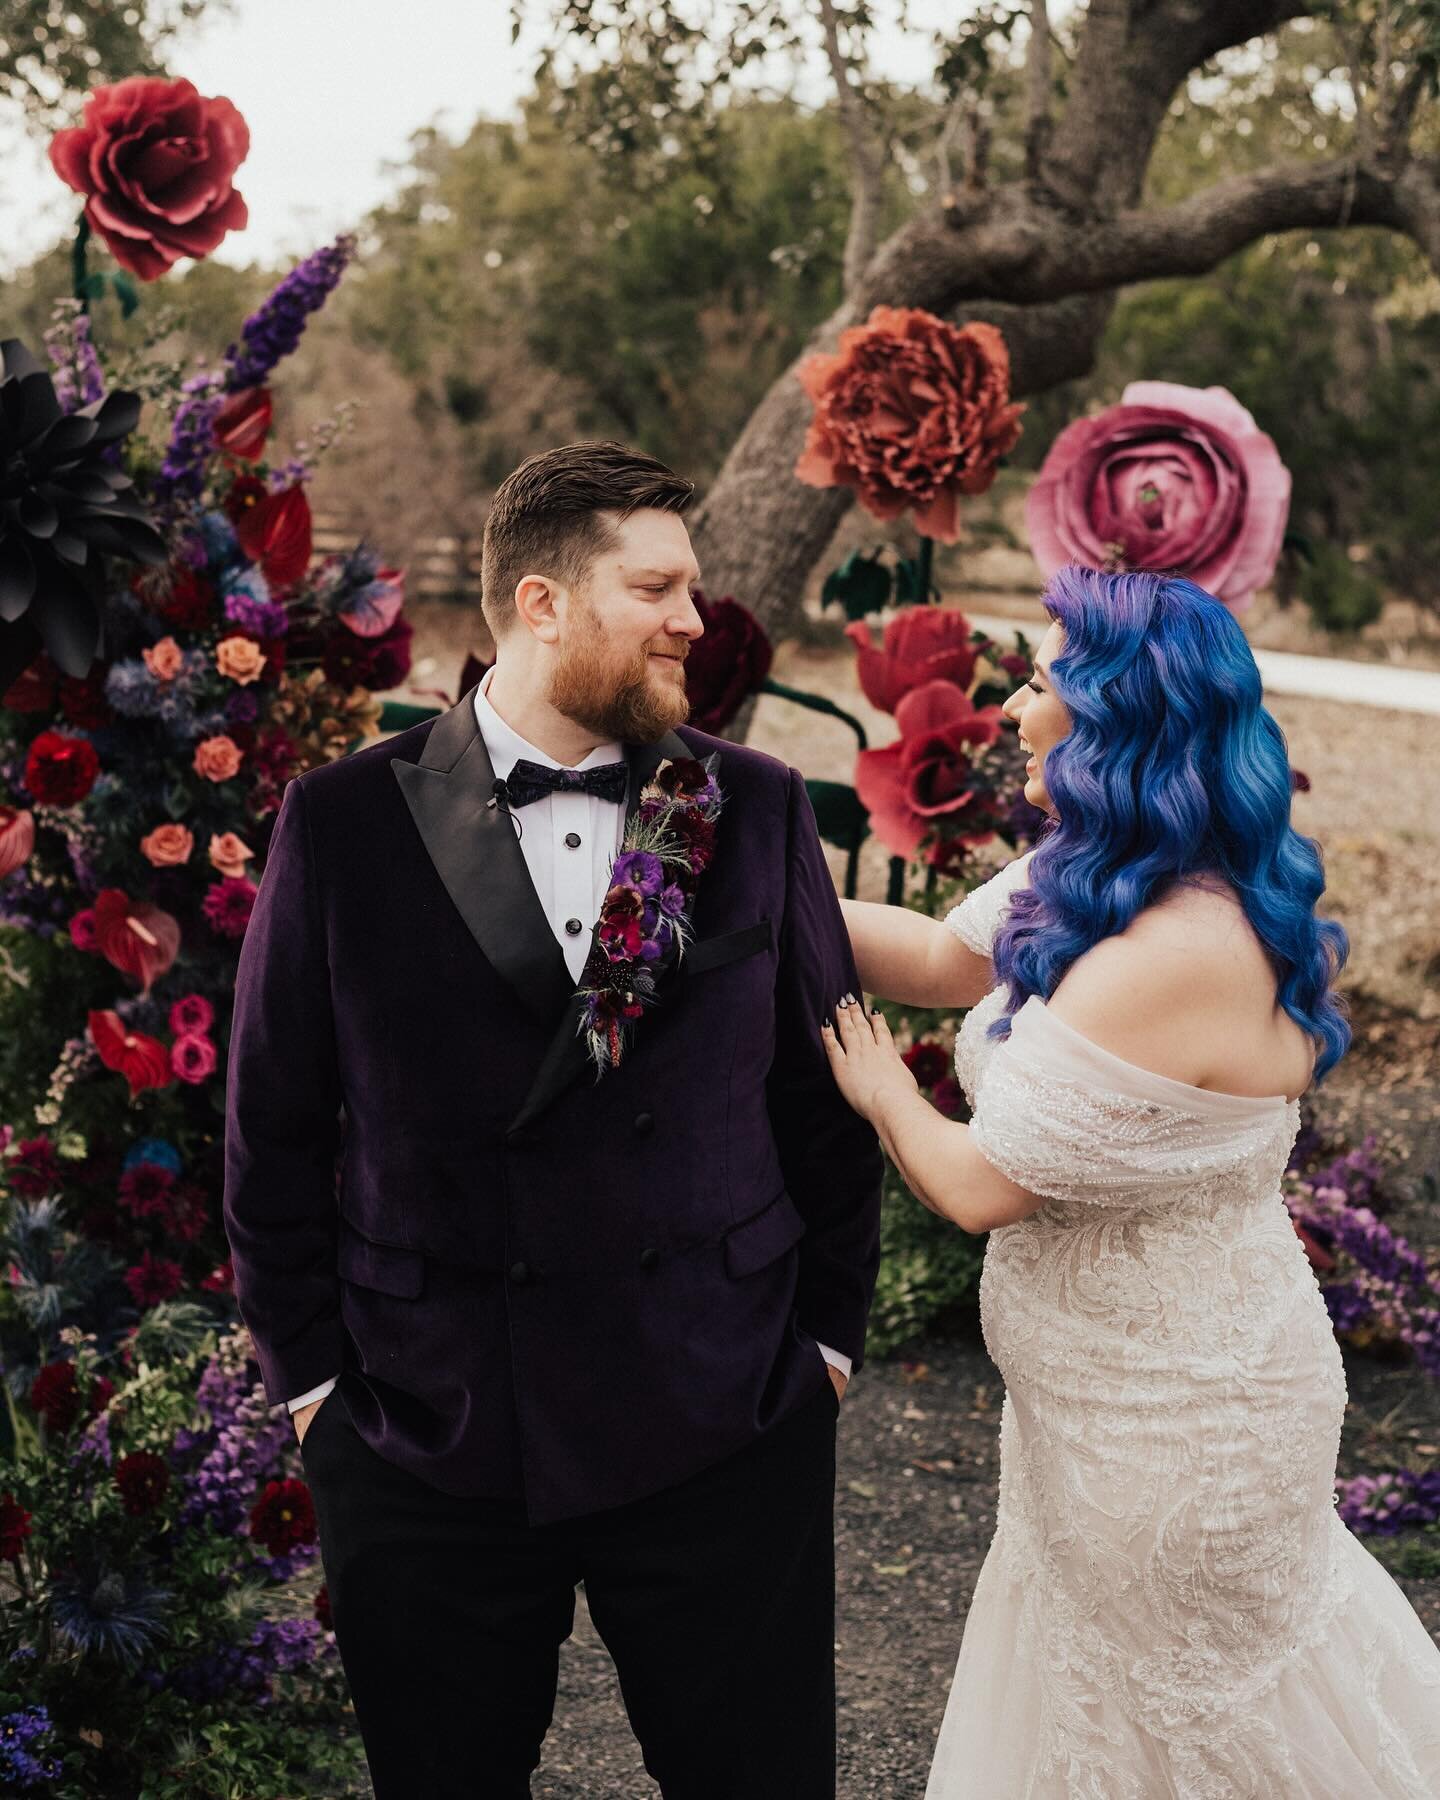 A wedding day in wonderland for Brittany + Gavin&hellip; 💜🌈🪄🐇
I can assure you their guests hadn&rsquo;t ever experienced a day like this. Brittany loves fairytales, colorful things and they enjoy attending music festivals together. She&rsquo;s a